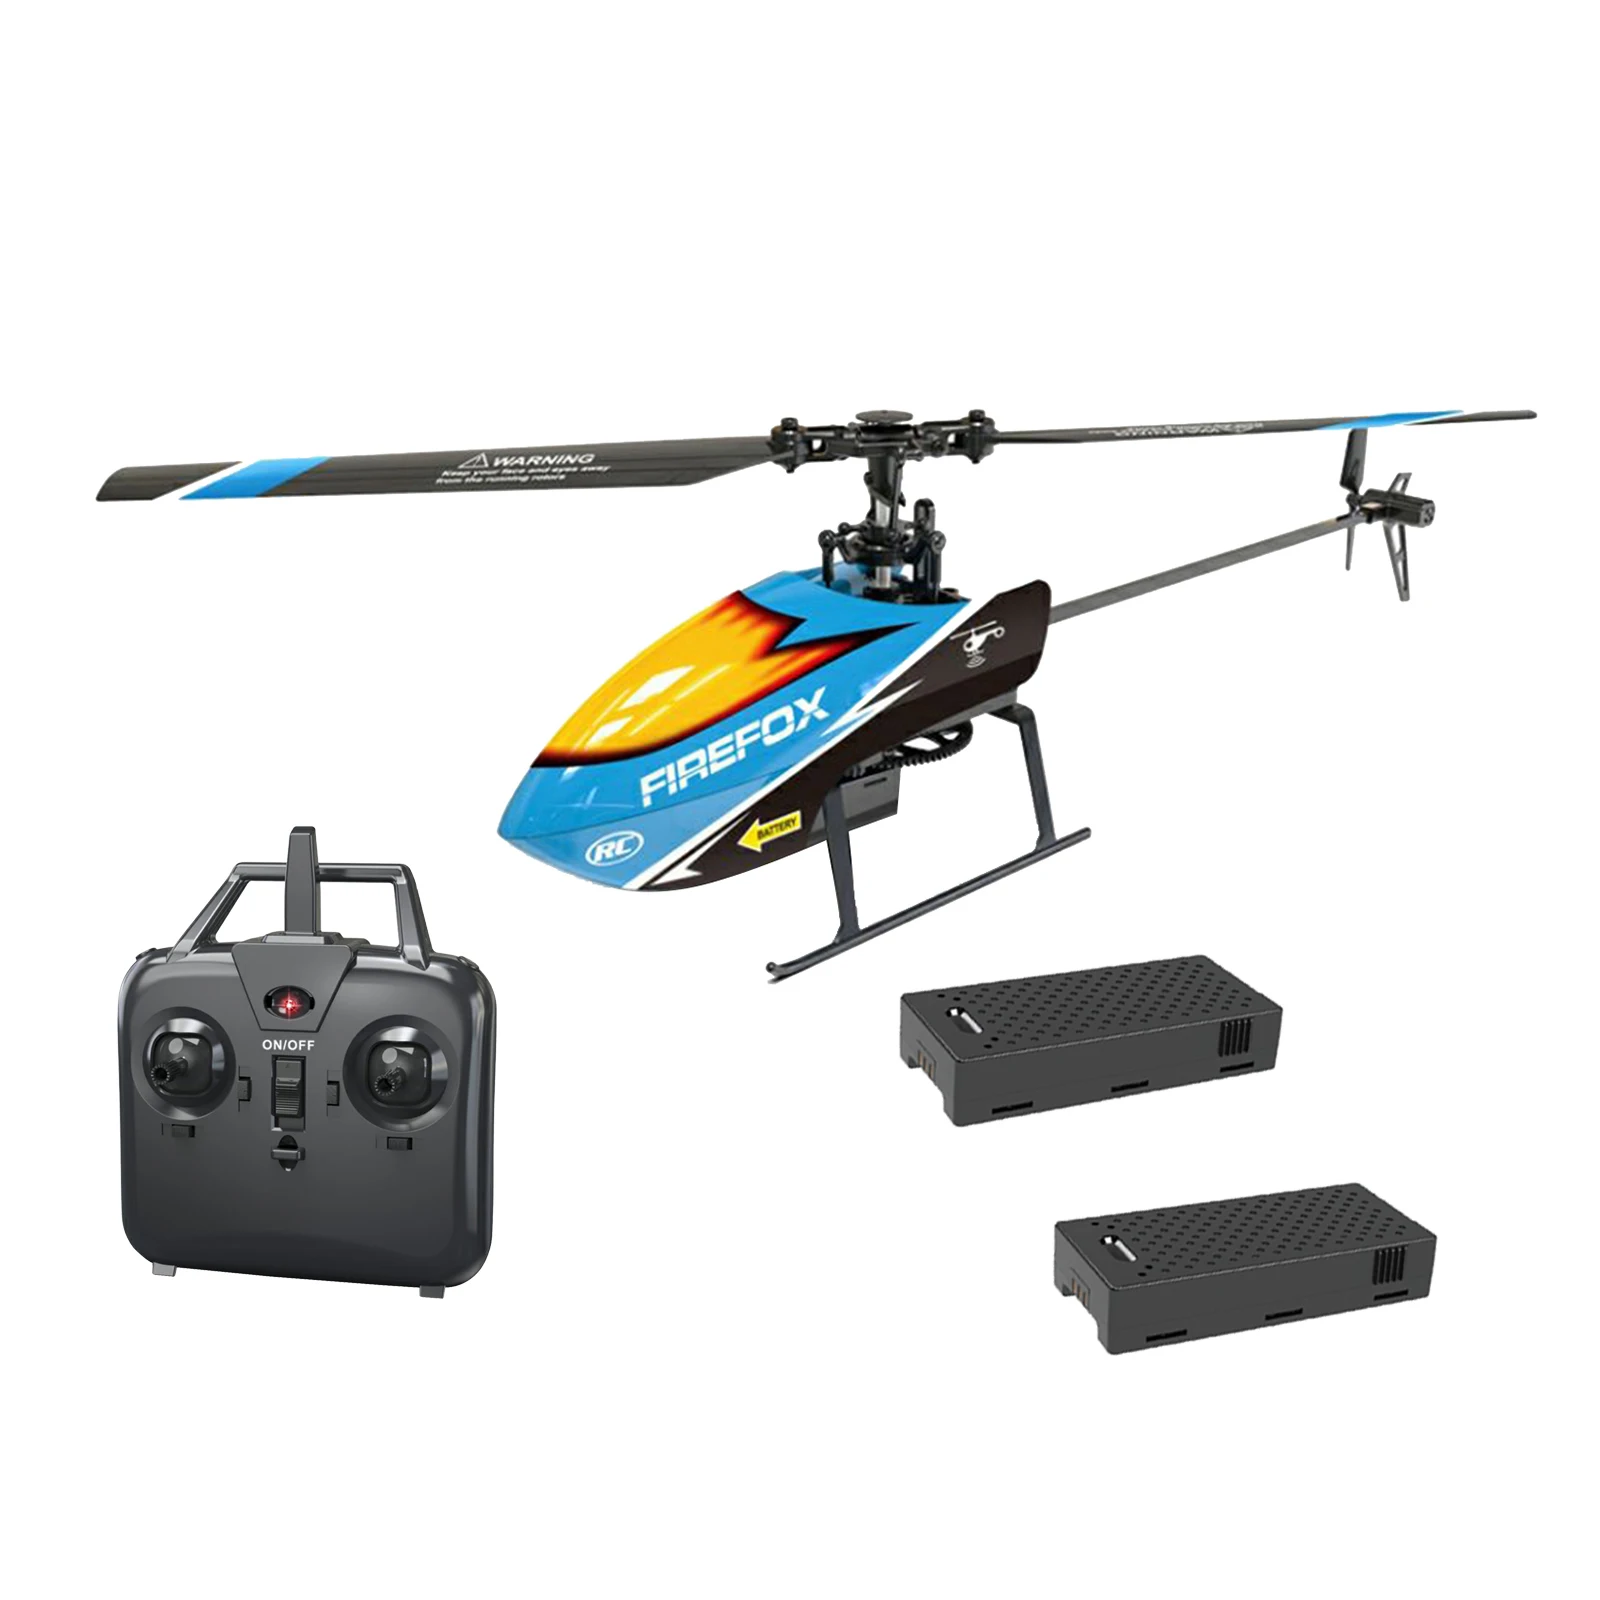 4CH 4 Channel Mini RC Helicopter with 6-axis Gyro for Indoor to Fly for Kids